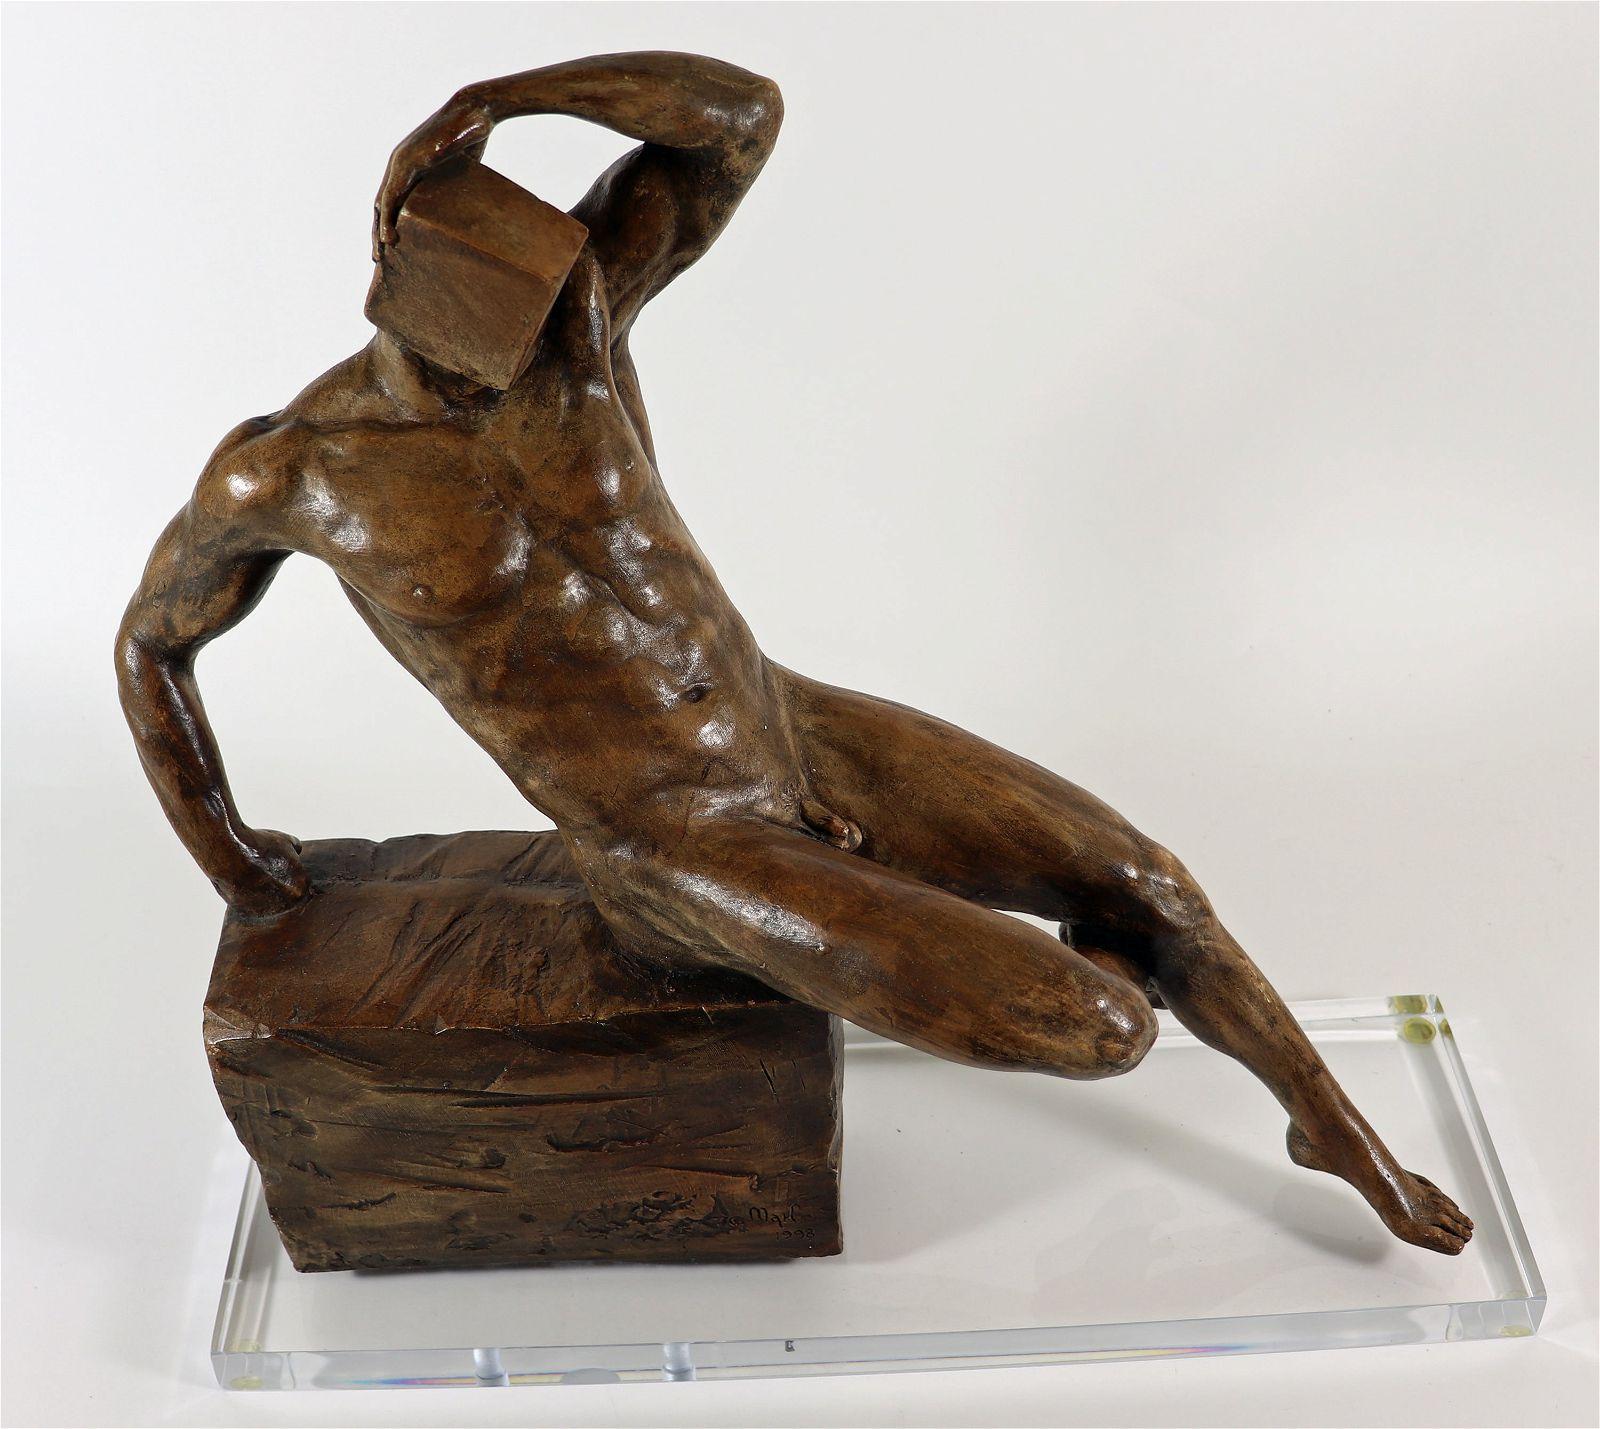 Male Nude Bronze Sculpture 1998
Marlo for M.A.C. California, bronze sculpture of a nude man figure with block head on lucite base. Signed on side and dated 1998. Measures 17